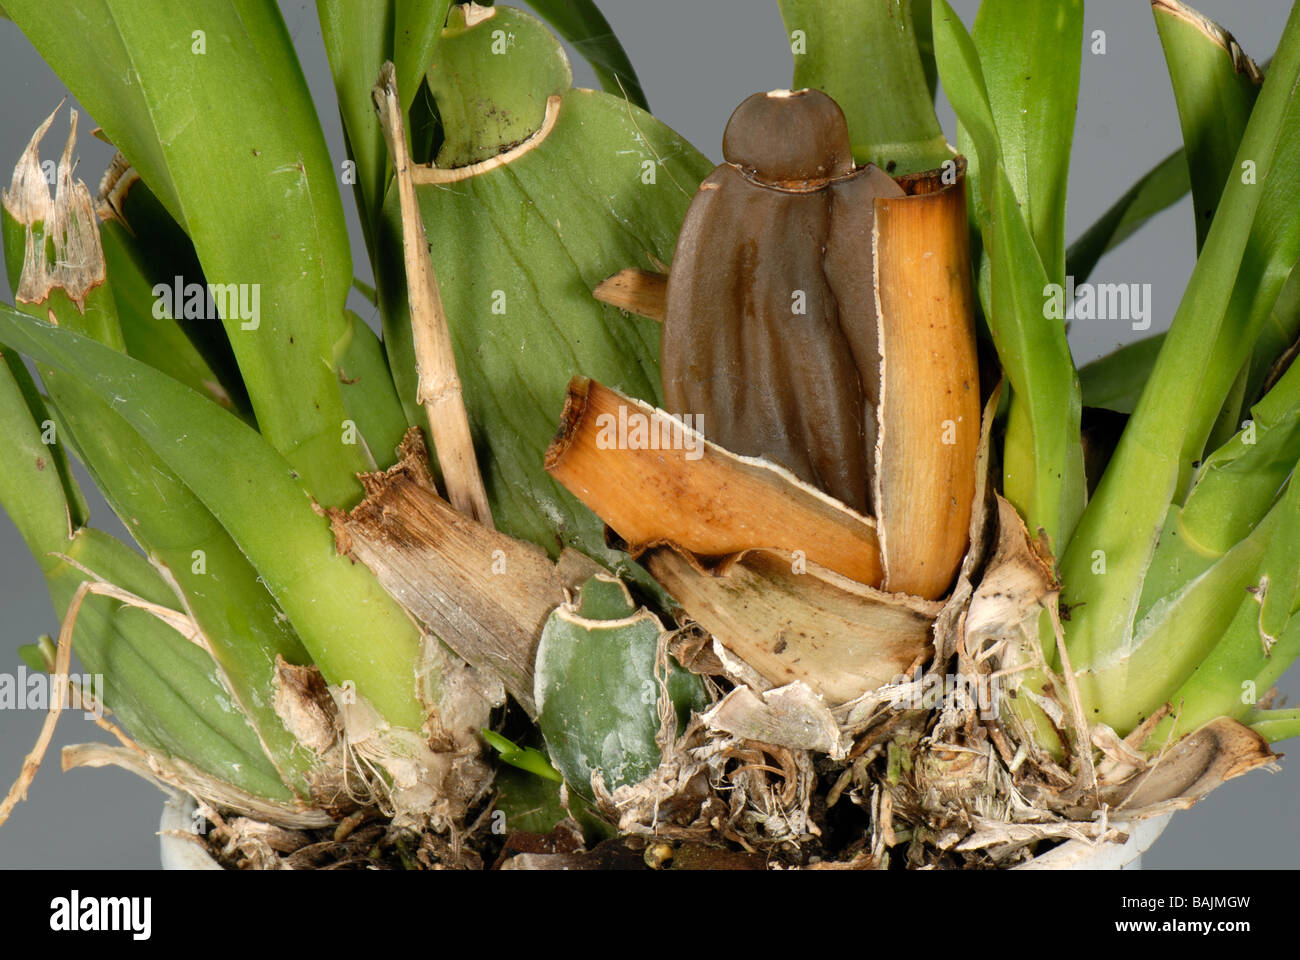 Root rot Phytophthora cactorum symptoms on an ornamental orchid house plant Stock Photo